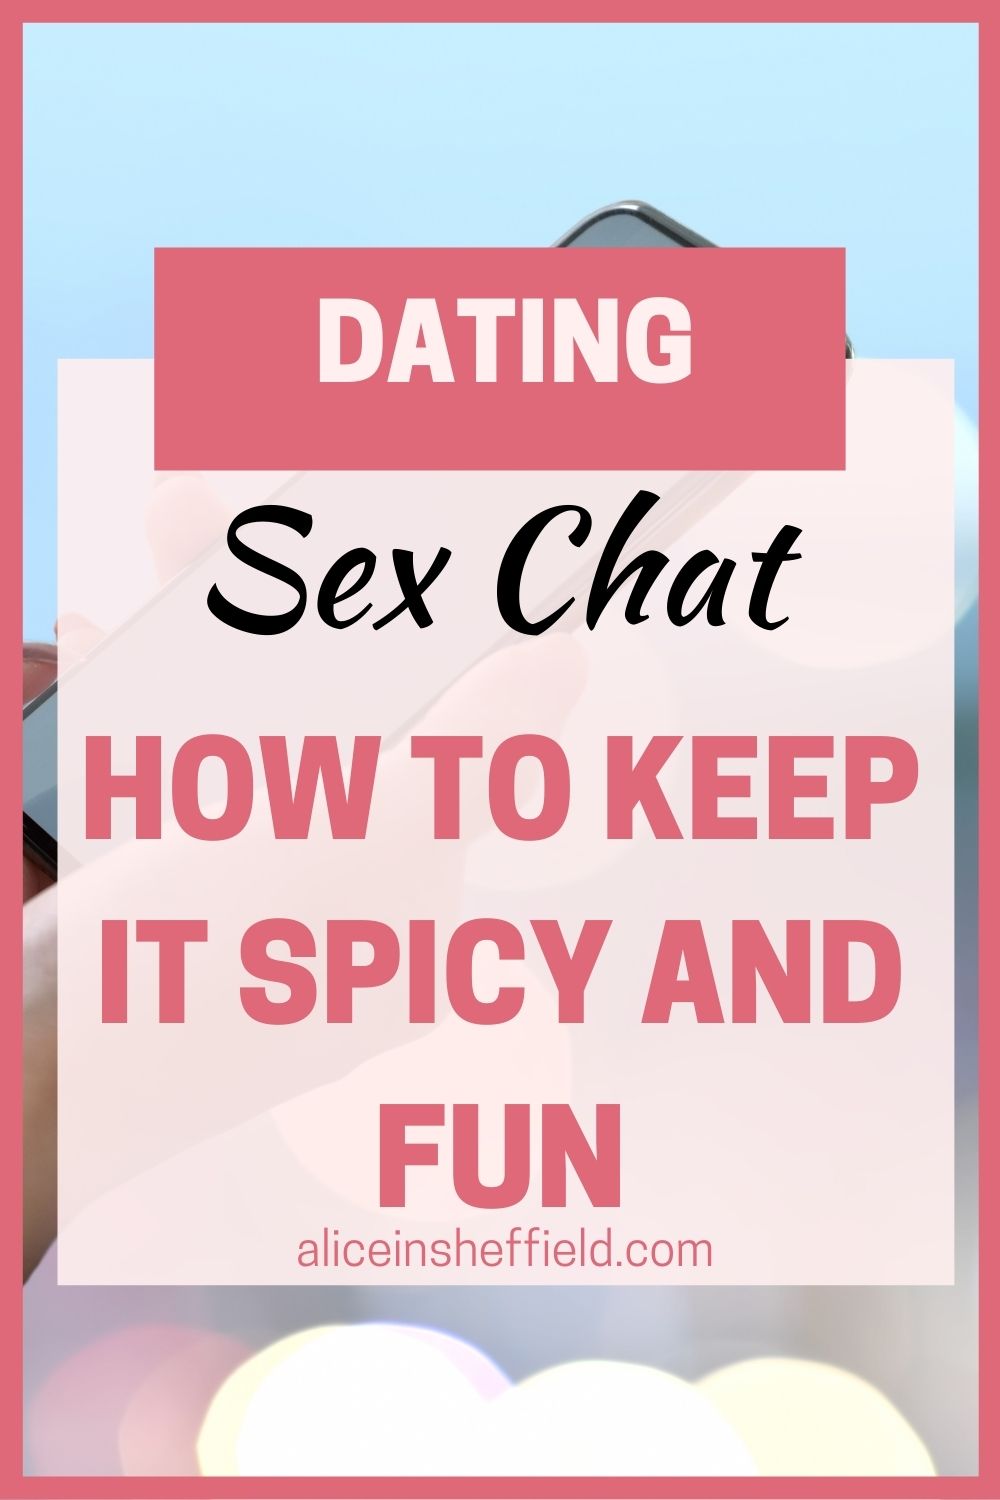 What Are Some Good And Original Tips For Sex Chat Alice In Sheffield